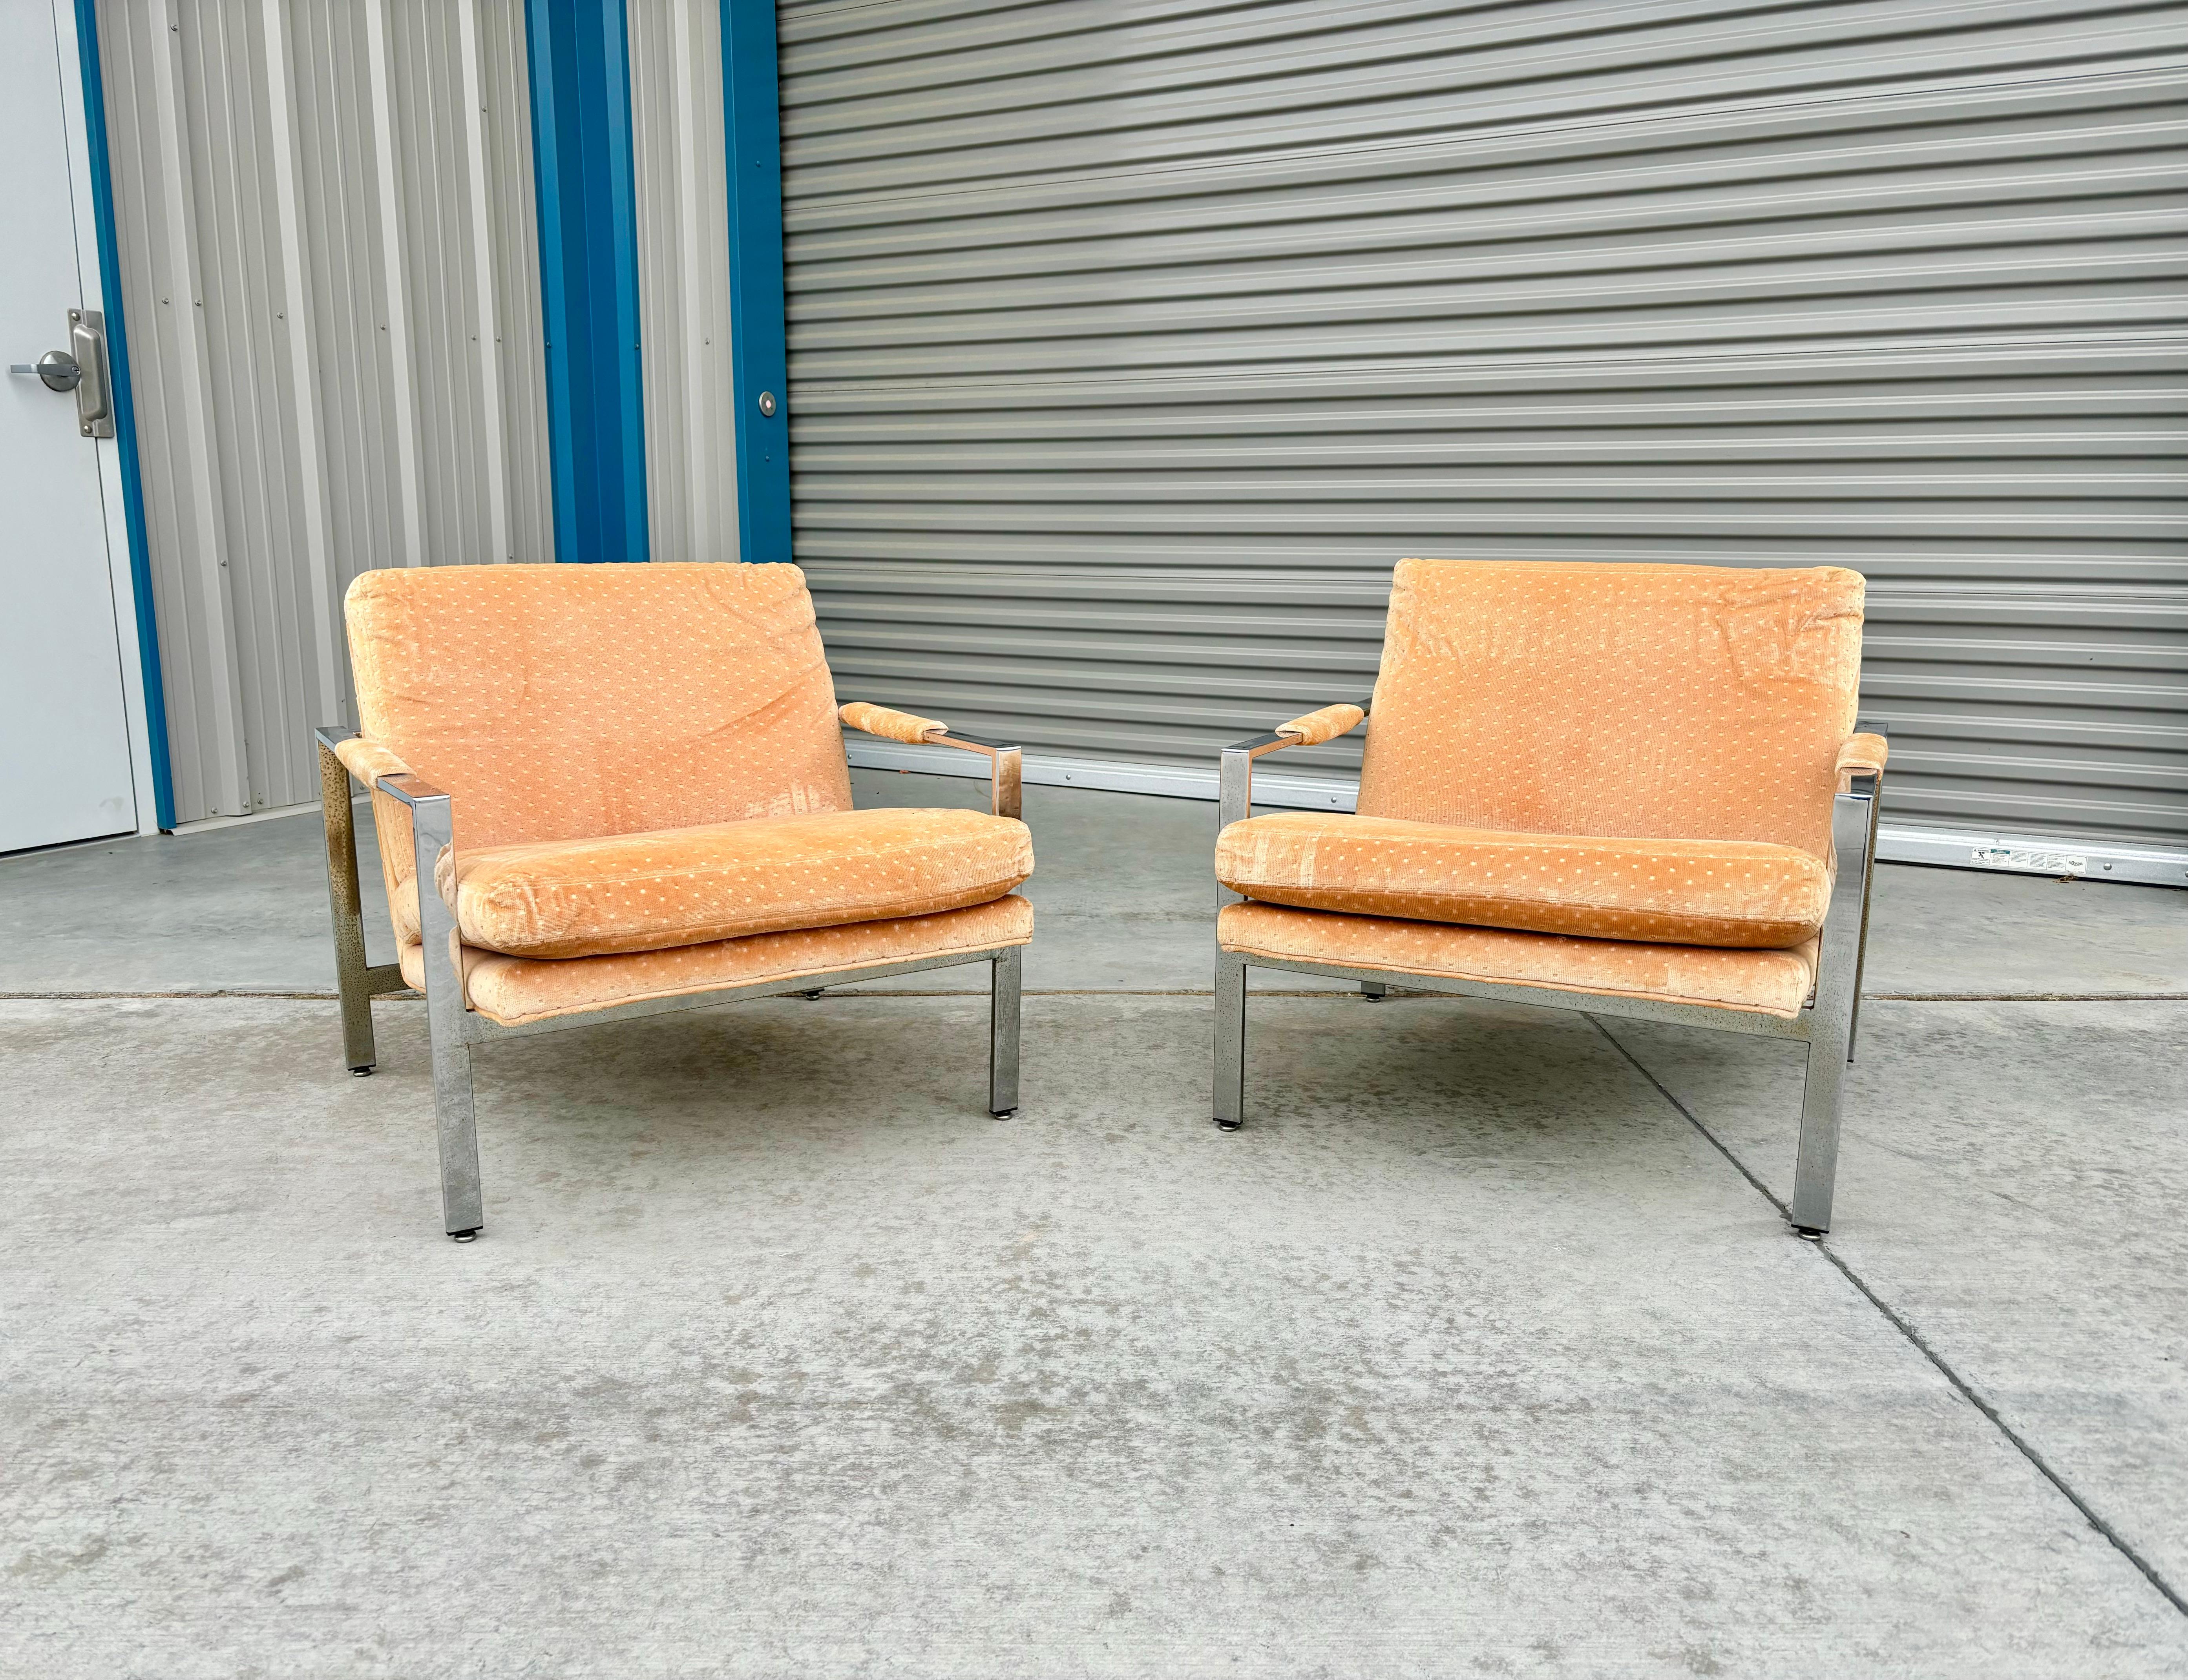 Mid-century chrome lounge chairs designed by Milo Baughman and manufactured by Thayer Coggin in the United States circa 1970s. The sleek chrome frames elegantly support the vibrant orange upholstery, offering a perfect blend of form and function.